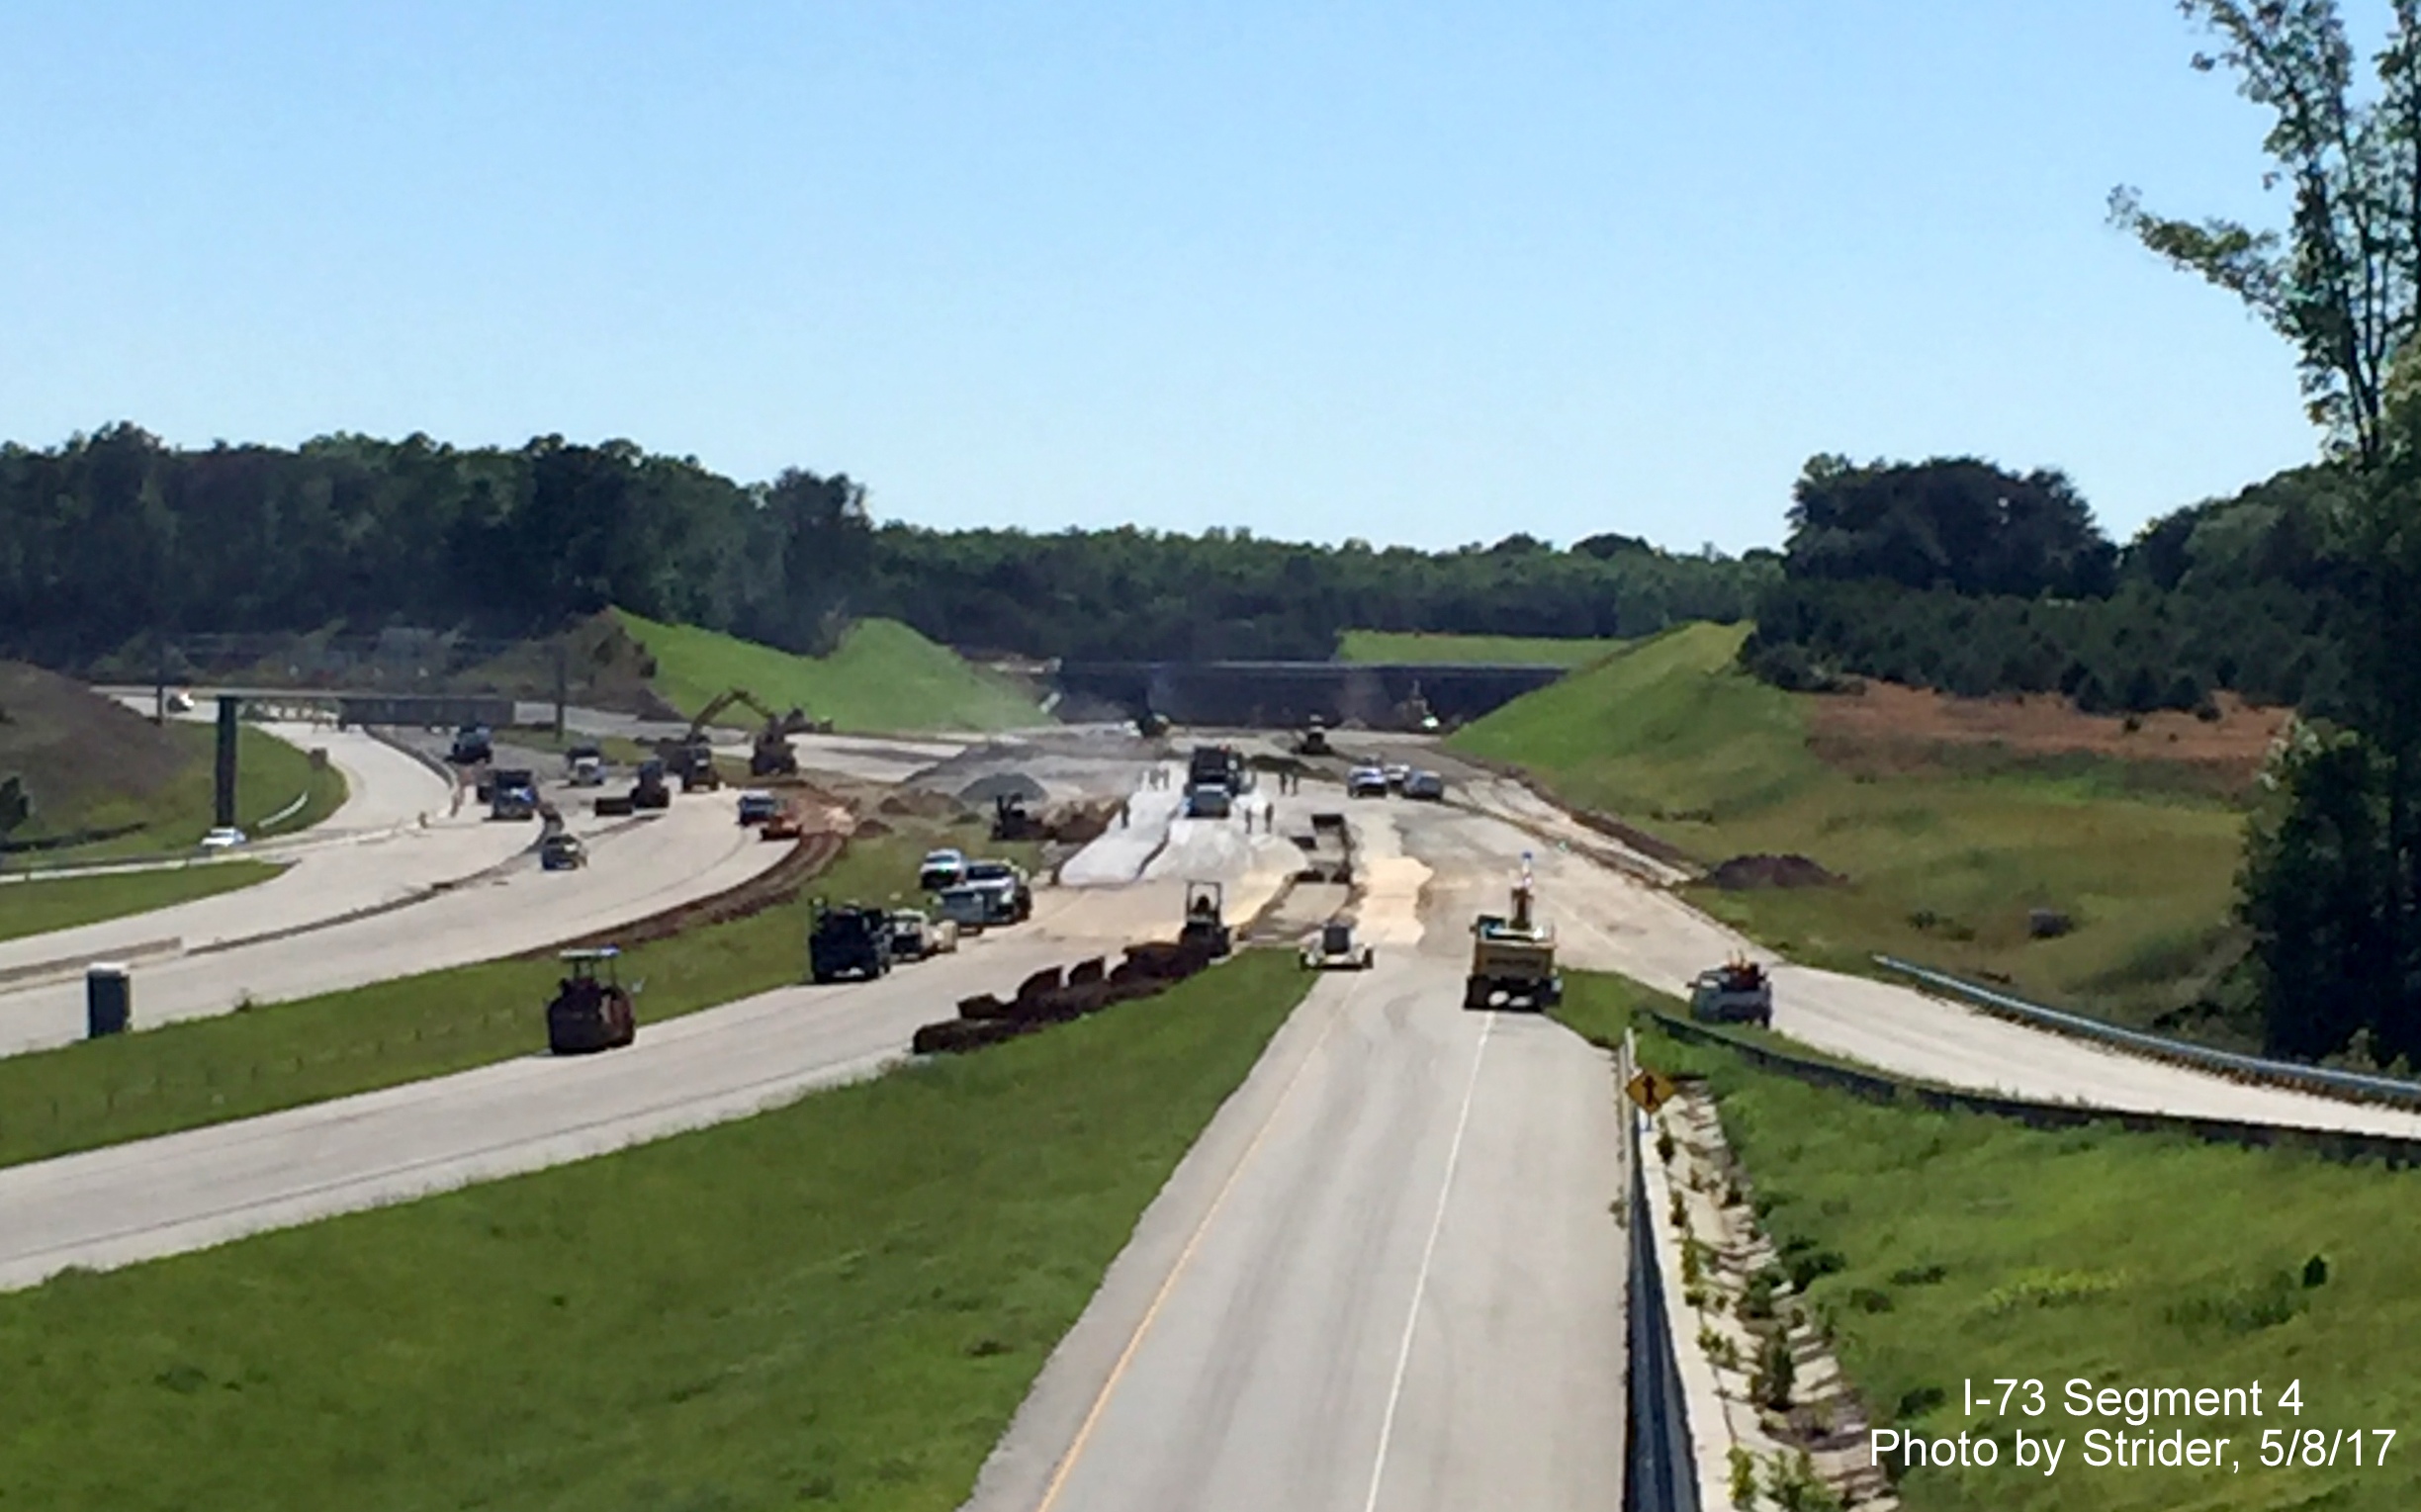 Image taken of construction on Bryan Blvd near PTI Airport to connect to future I-73 roadway to NC 68, from Strider